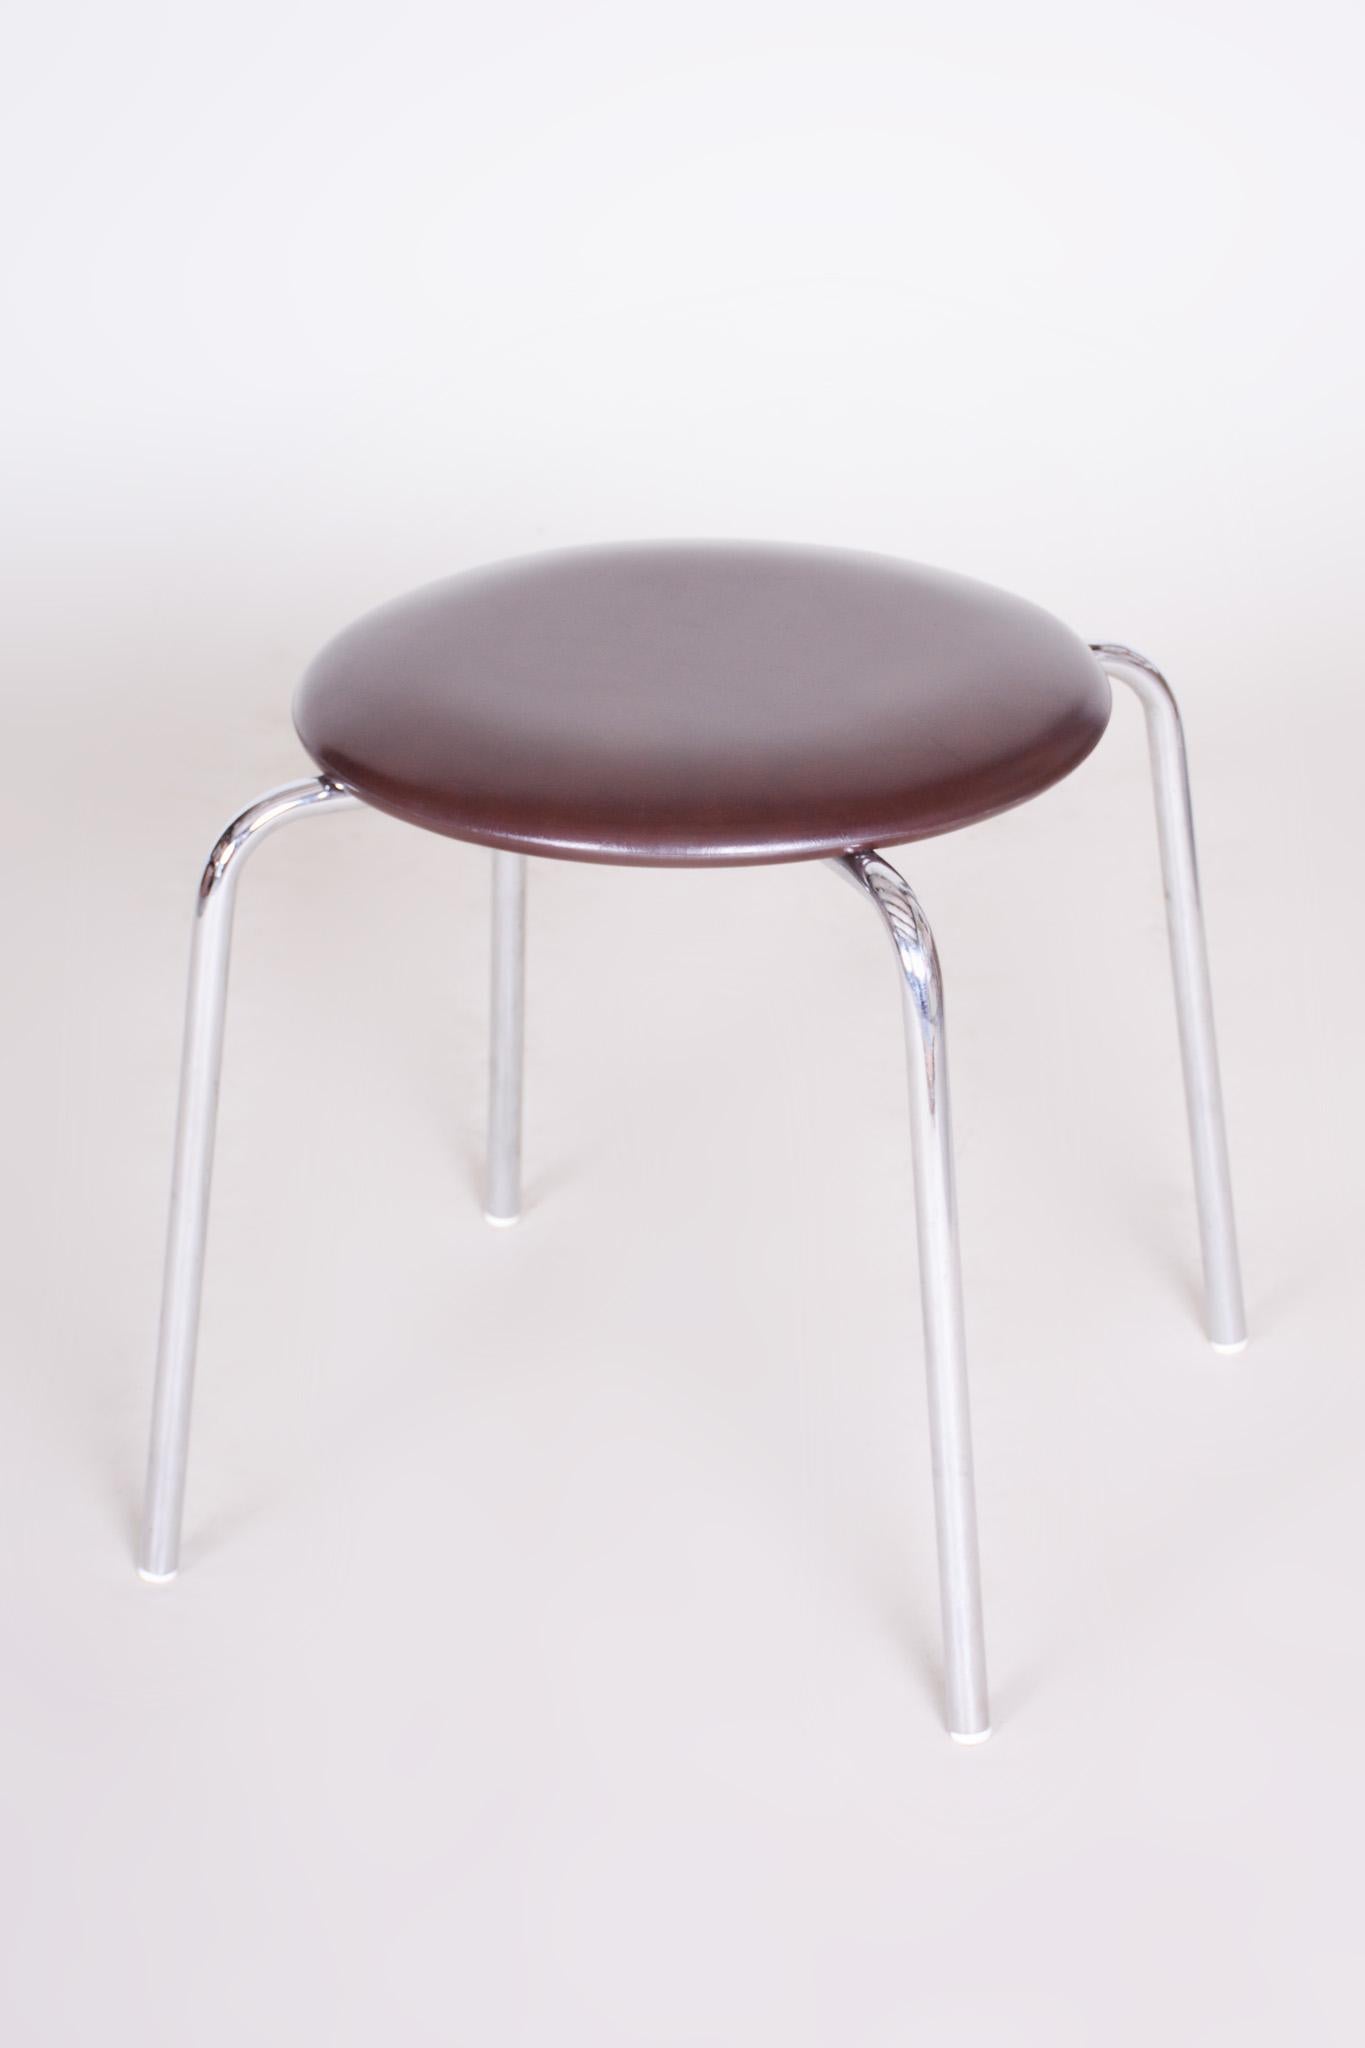 Midcentury Steel and Leatherette Stools, 1960s, Original Condition In Good Condition For Sale In Horomerice, CZ